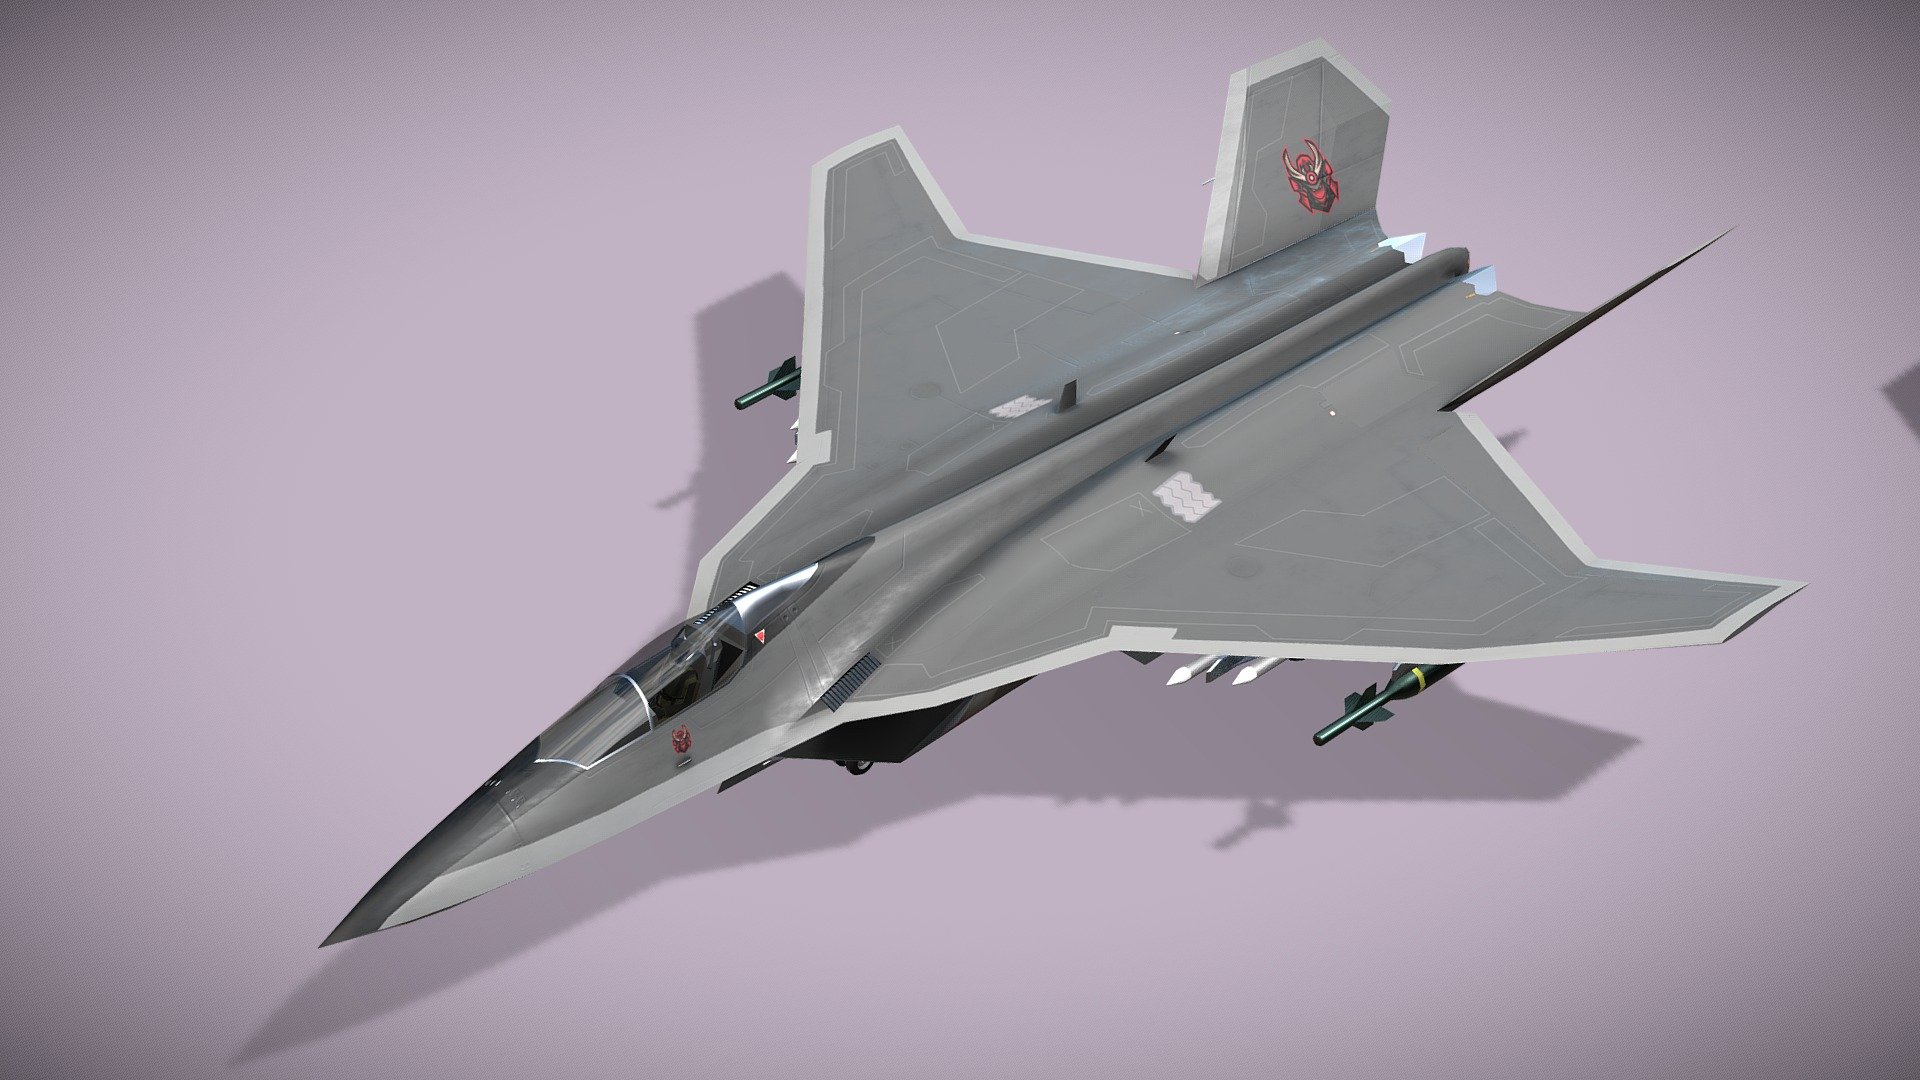 Mitsubishi F-3 F-X Godzilla concept

Lowpoly model of japanese concept stealth jet fighter.



Mitsubishi F-X (unofficially called F-3) is a sixth-generation stealth fighter in development for the Japan Air Self-Defense Force. It is Japan's first domestically developed stealth fighter jet and will replace the Mitsubishi F-2 by the mid '30s. Its development is to also bolster the nation's defense industry and potentially enter the international arms market amid Japan's change in defense posture. In Oct 2020, Mitsubishi Heavy Industries was selected as the lead developer. The F-X is said to be bigger than the F-22. The large size indicates the MoD desires the aircraft to possess very long range and large payload capacity.



Standing version and flying with 2 color schemes

Fully rigged

Model has bump map, roughness map and 2 x diffuse textures



Check also my other aircrafts and cars.

Patreon with monthly free model - Mitsubishi F-3 F-X Godzilla - 3D model by NETRUNNER_pl 3d model